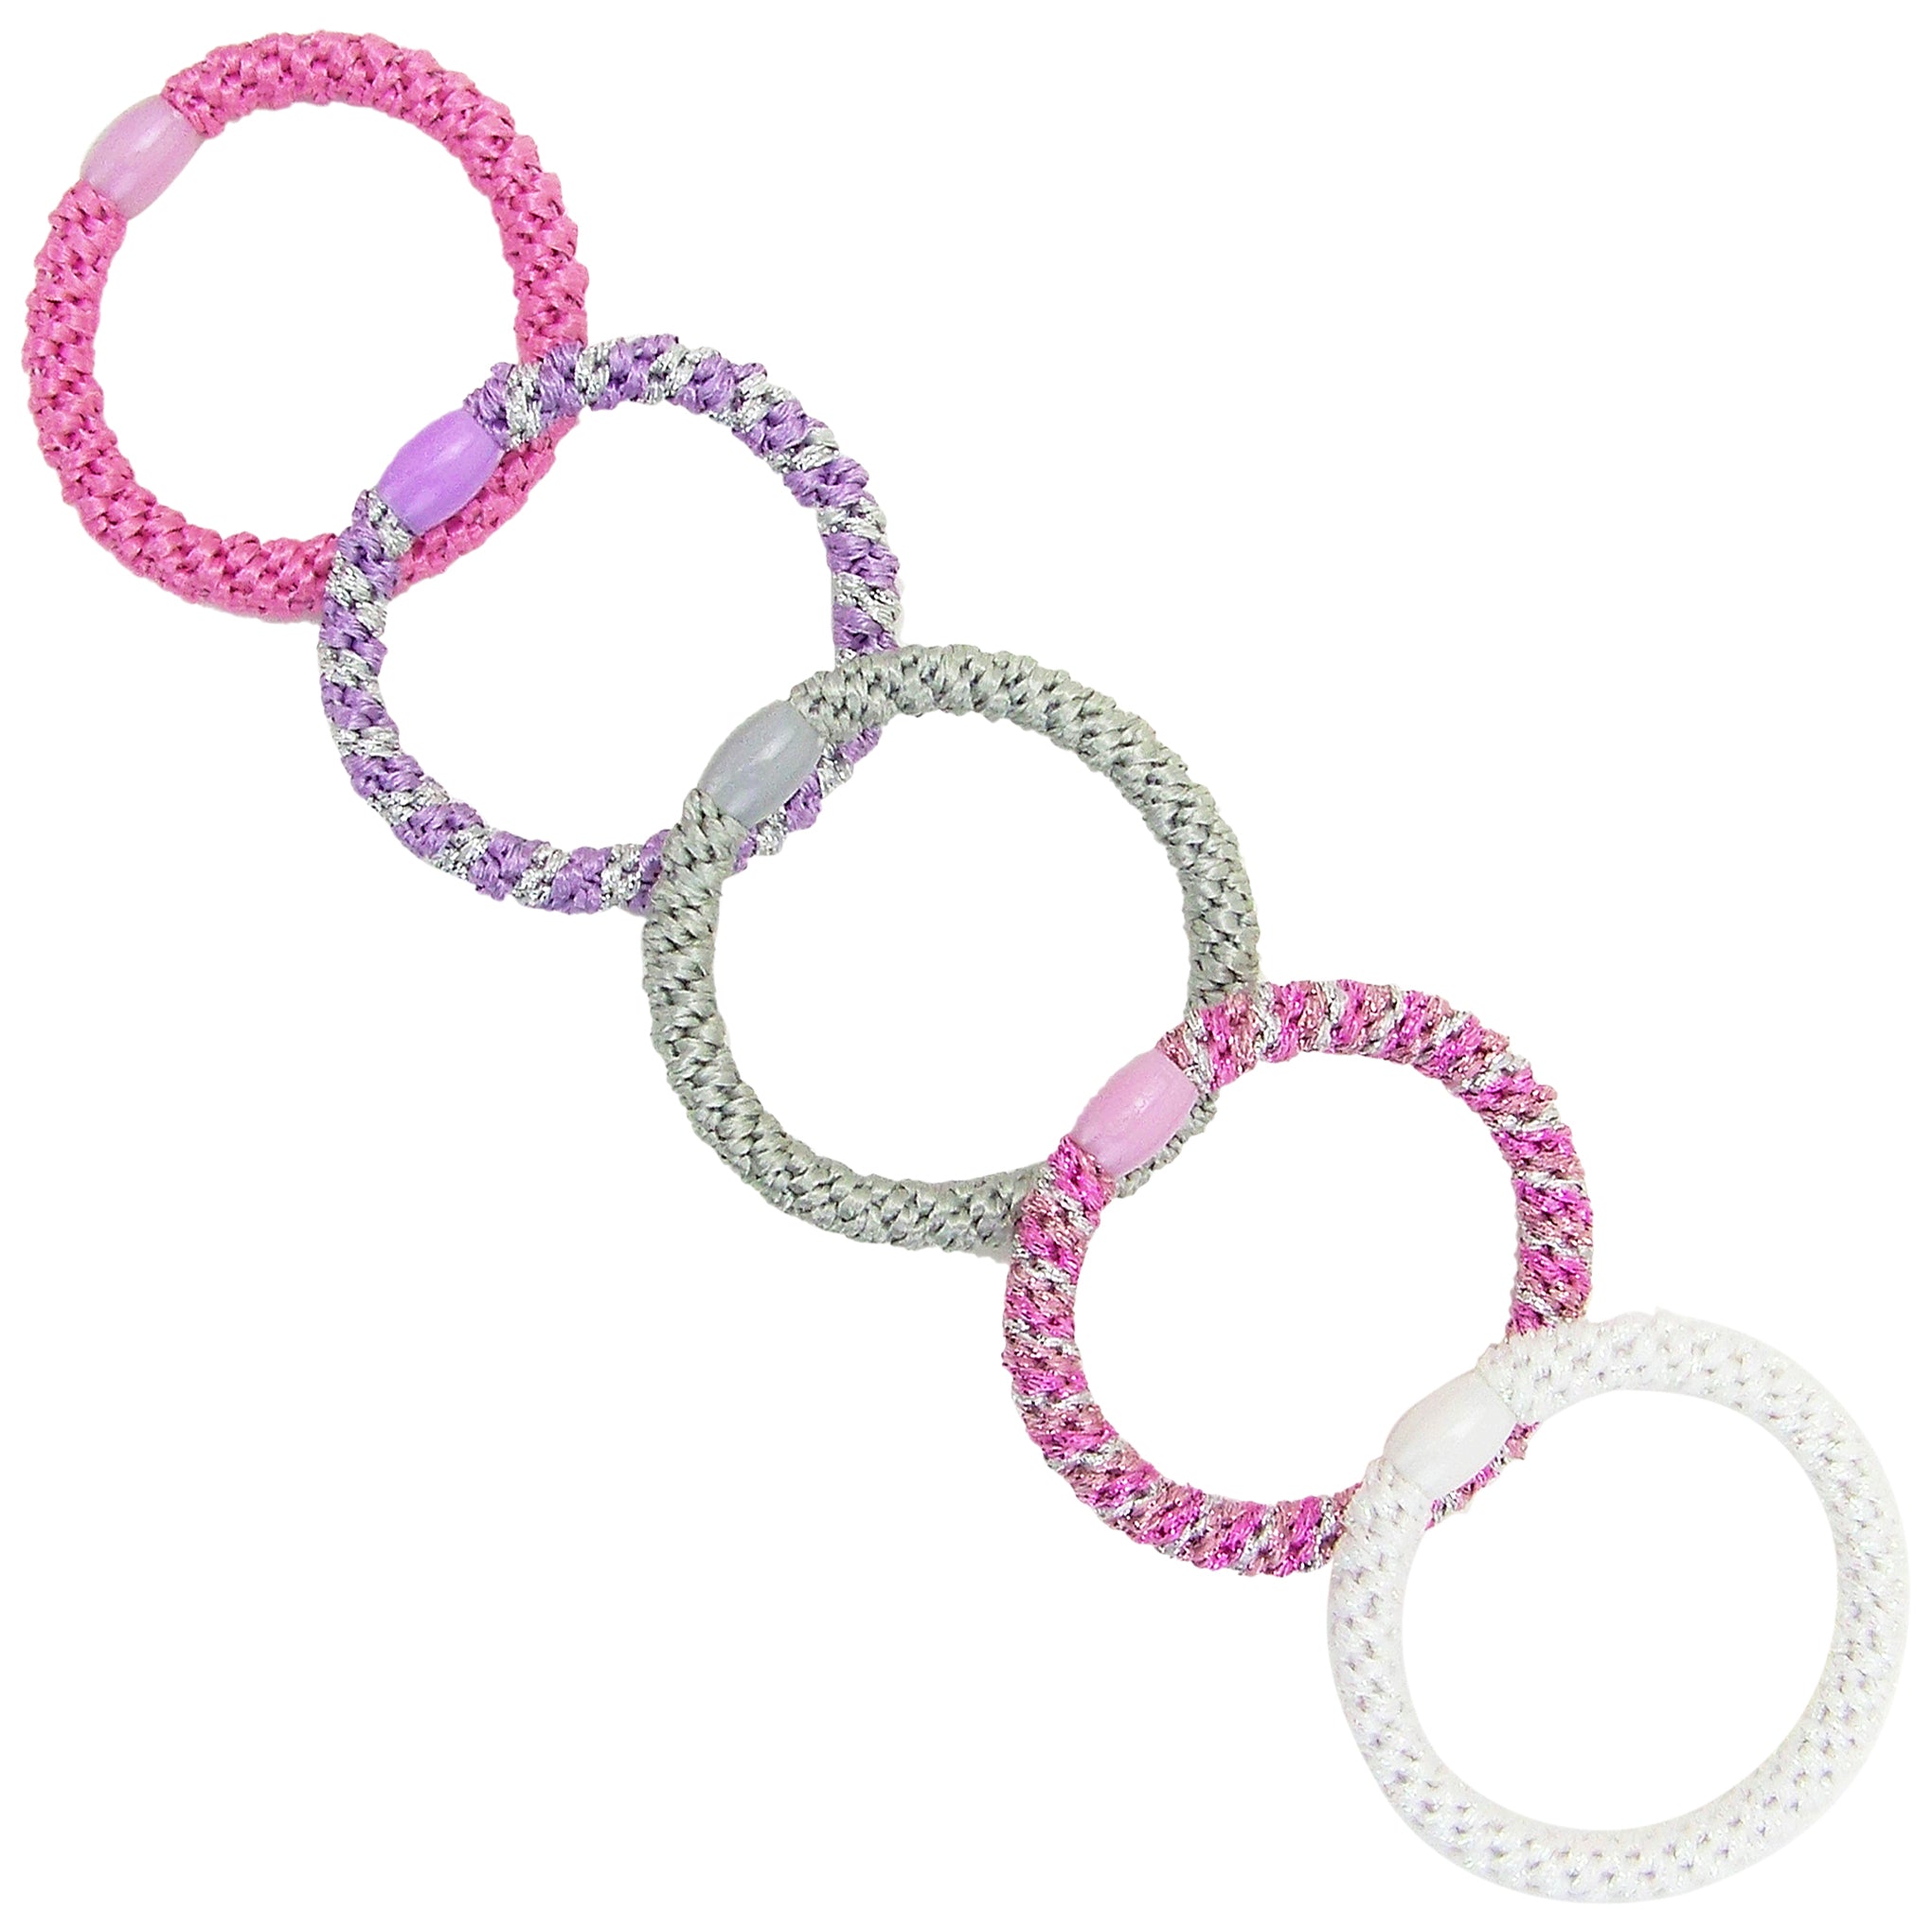 image of variations in L. Erickson Grab and Go Pony Tube Hair Ties in Princess 15 Pack